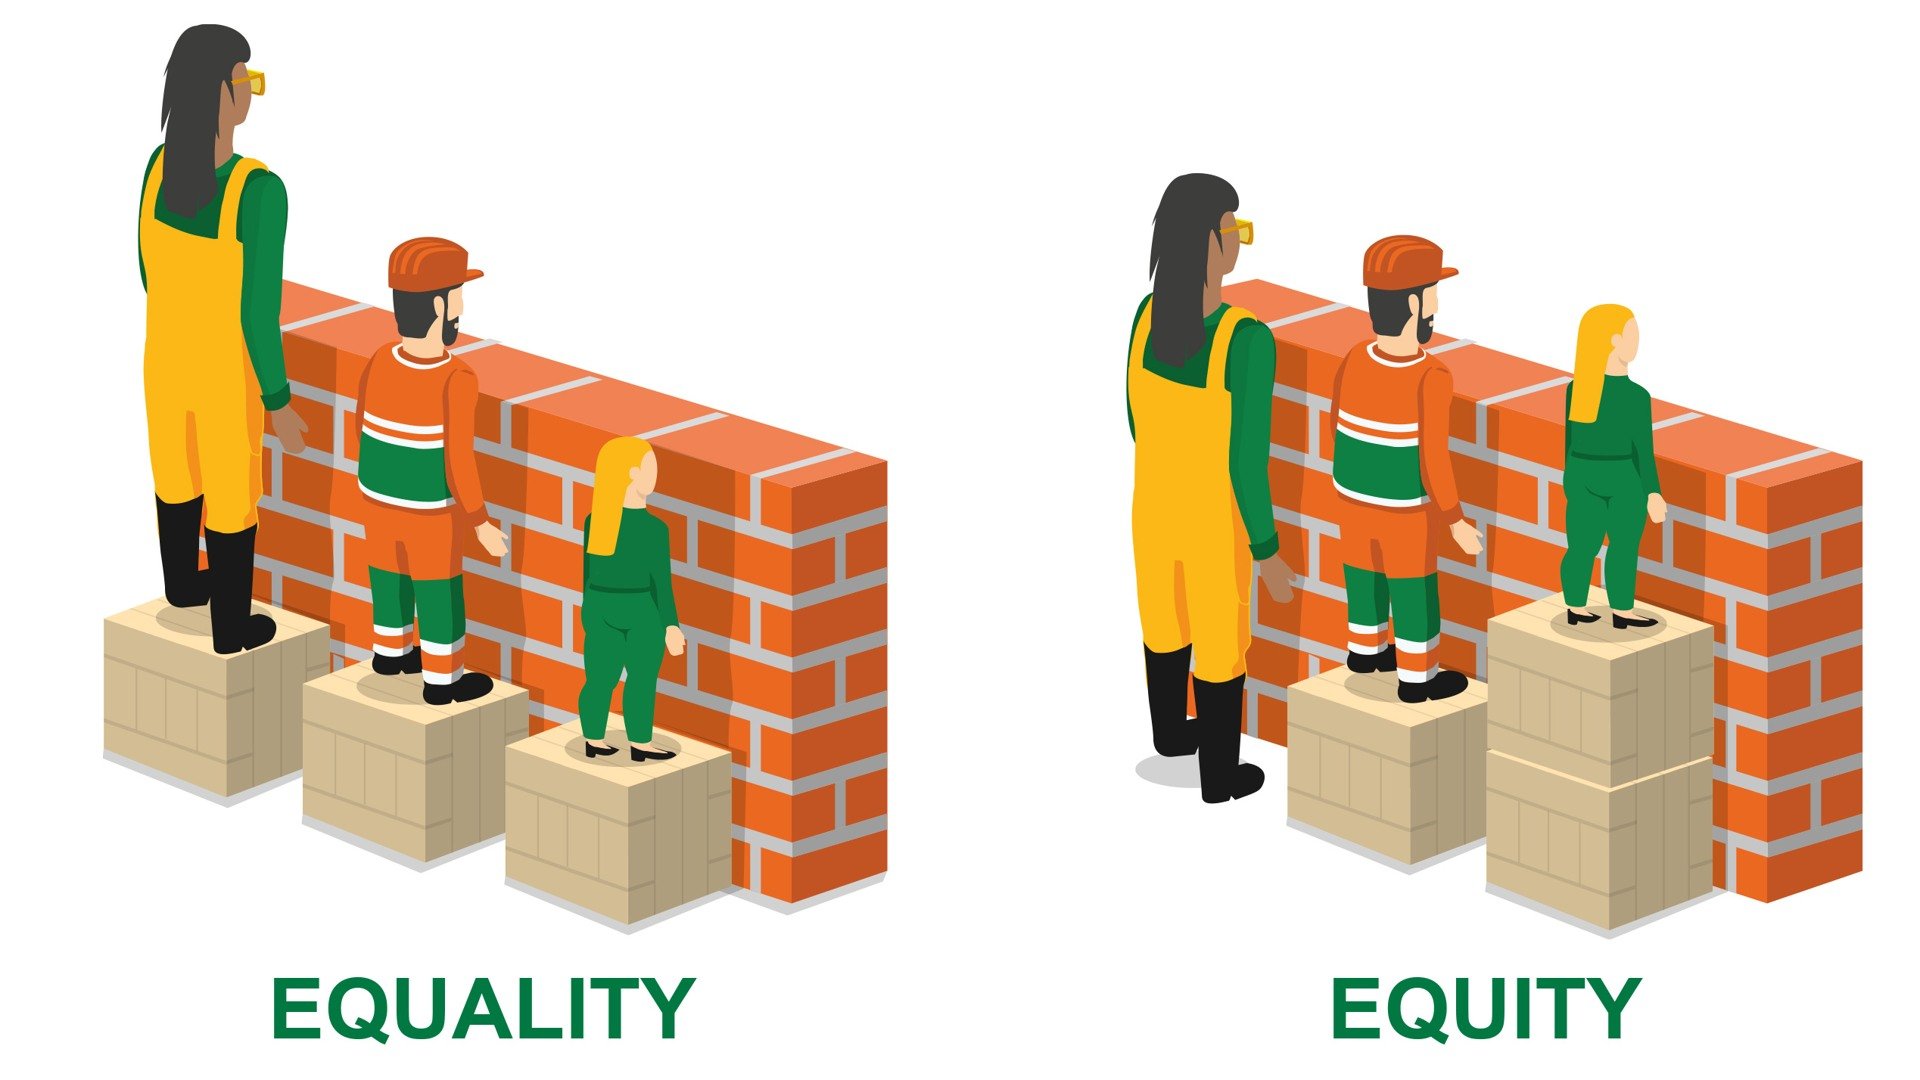 Illustration discribing the different between equality and equity.